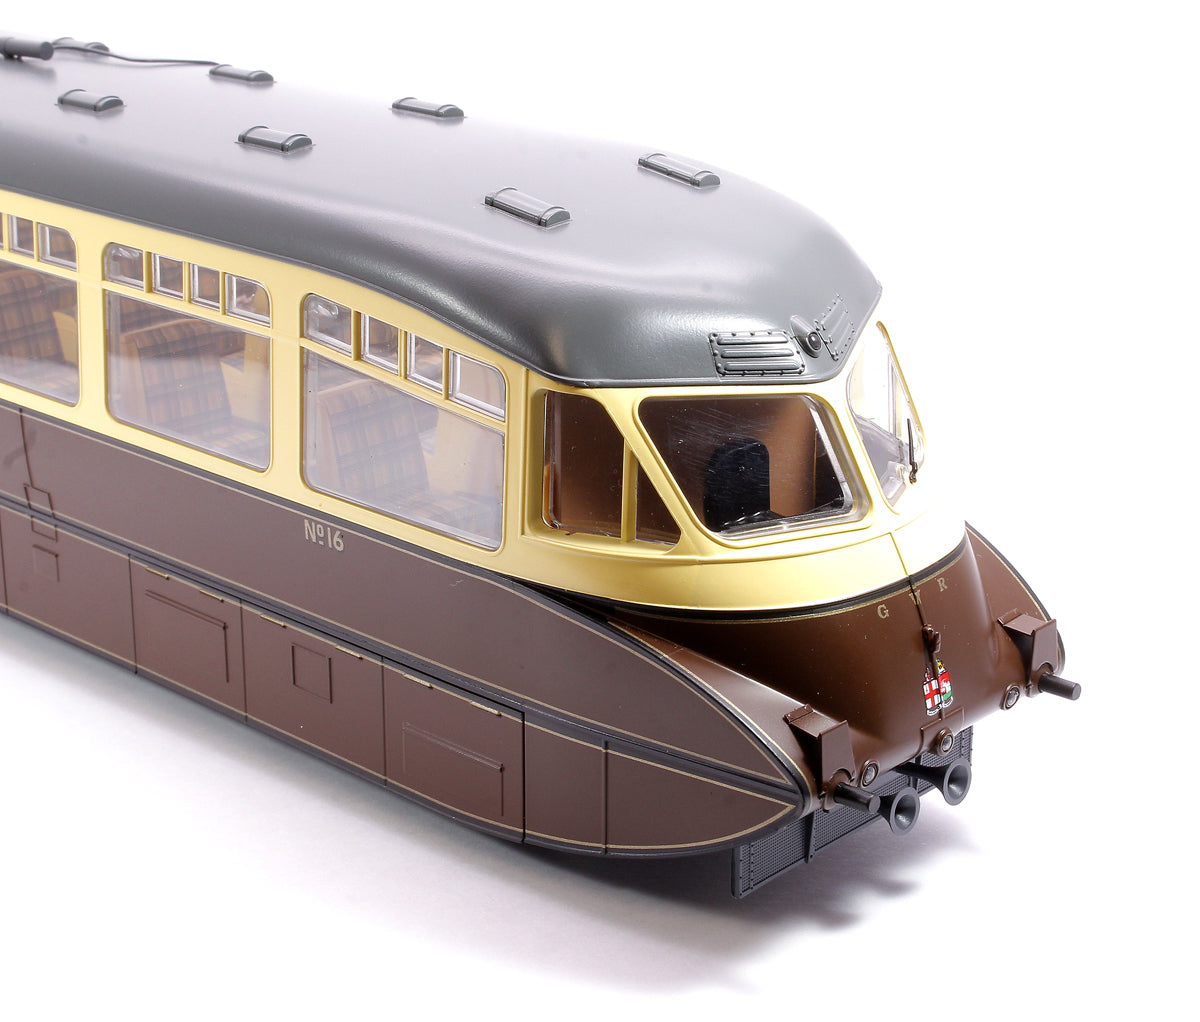 Streamlined Railcar 16 Lined Chocolate & Cream GWR Twin Cities Diesel Locomotive